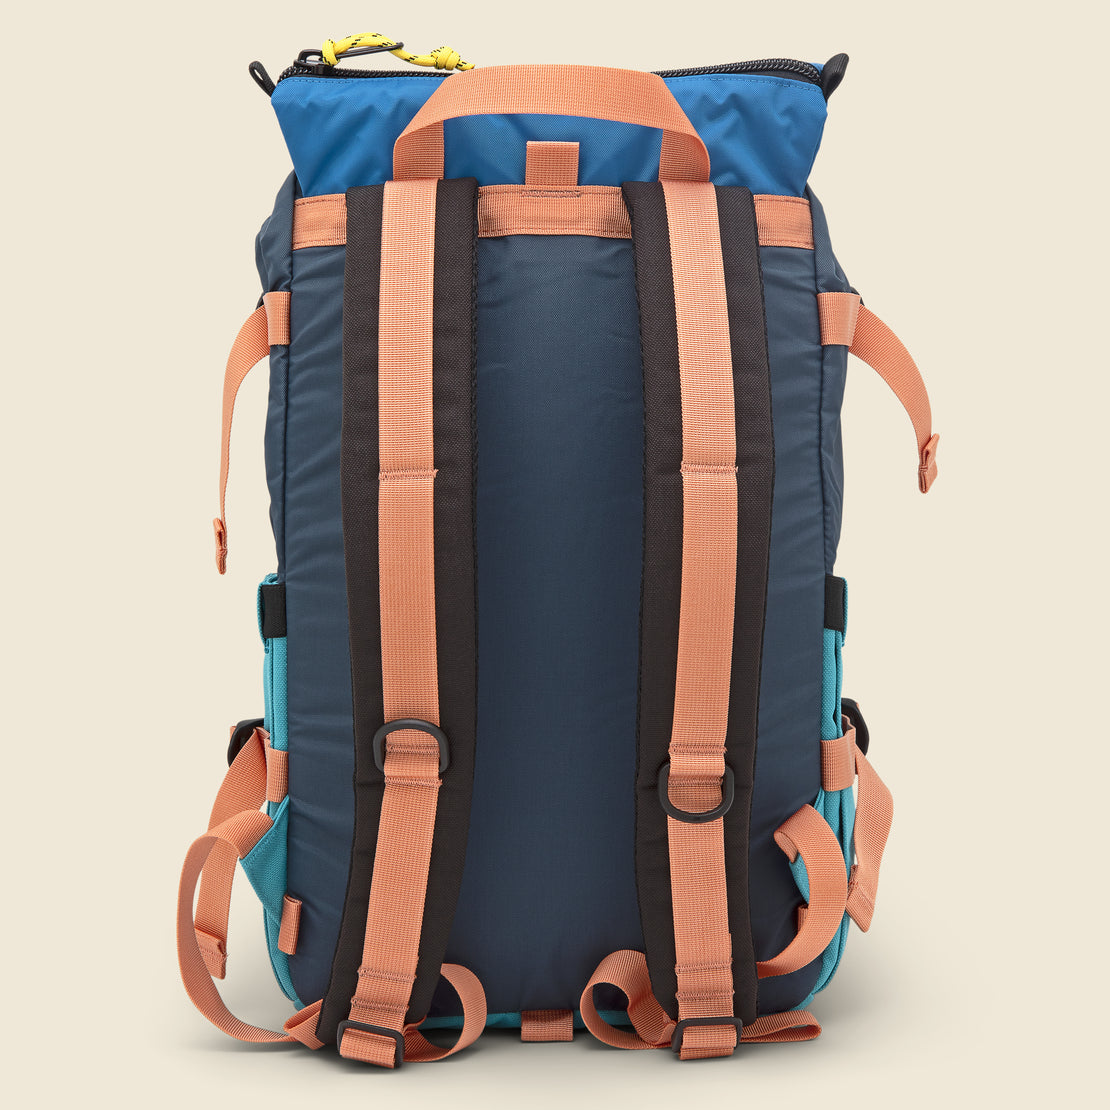 Rover Pack - Tile Blue/Pond Blue - Topo Designs - STAG Provisions - Accessories - Bags / Luggage